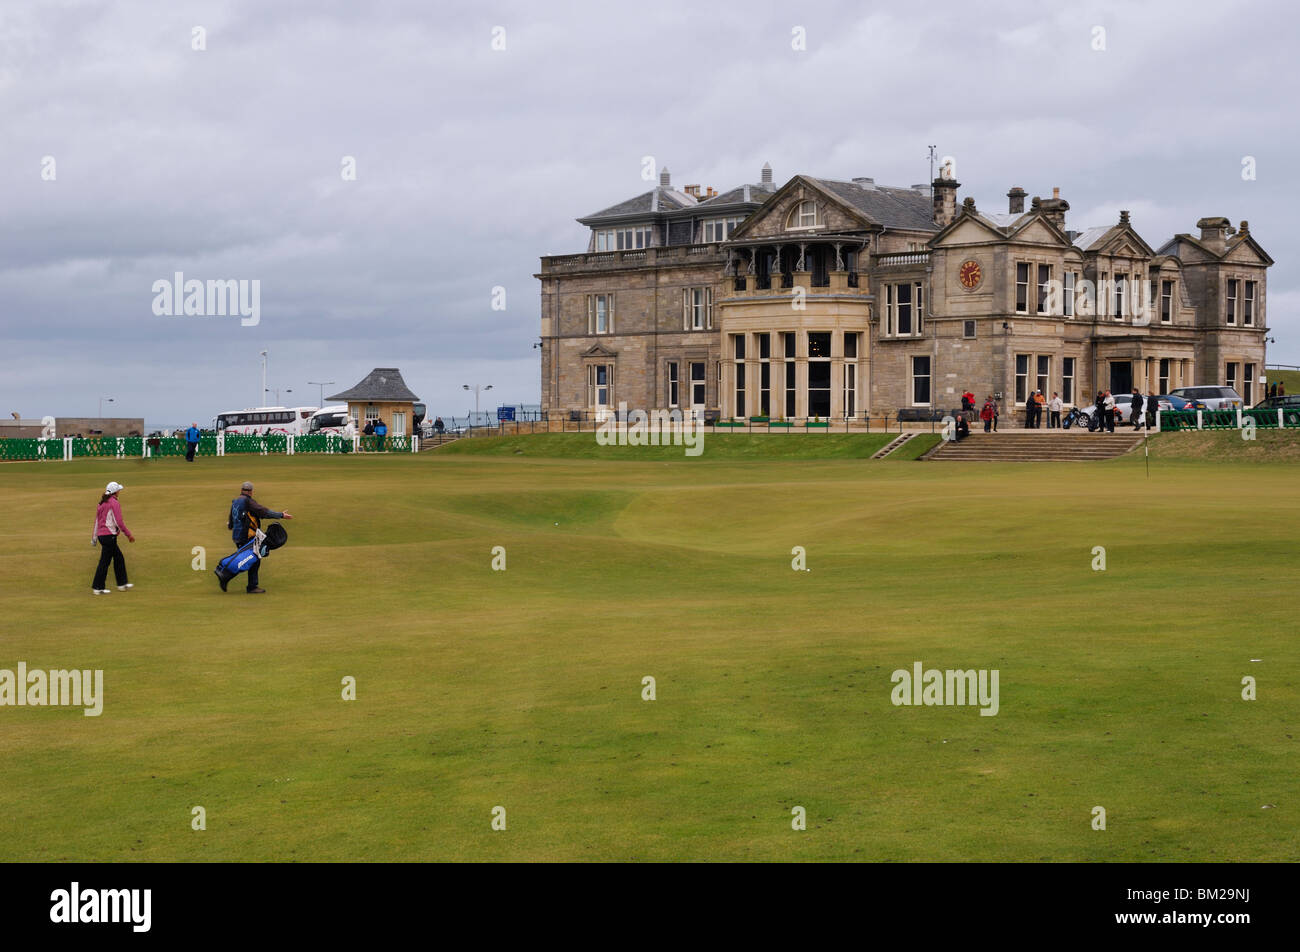 Saint Andrews Royal and Ancient Golf Club - St Andrews, Scotland Banque D'Images